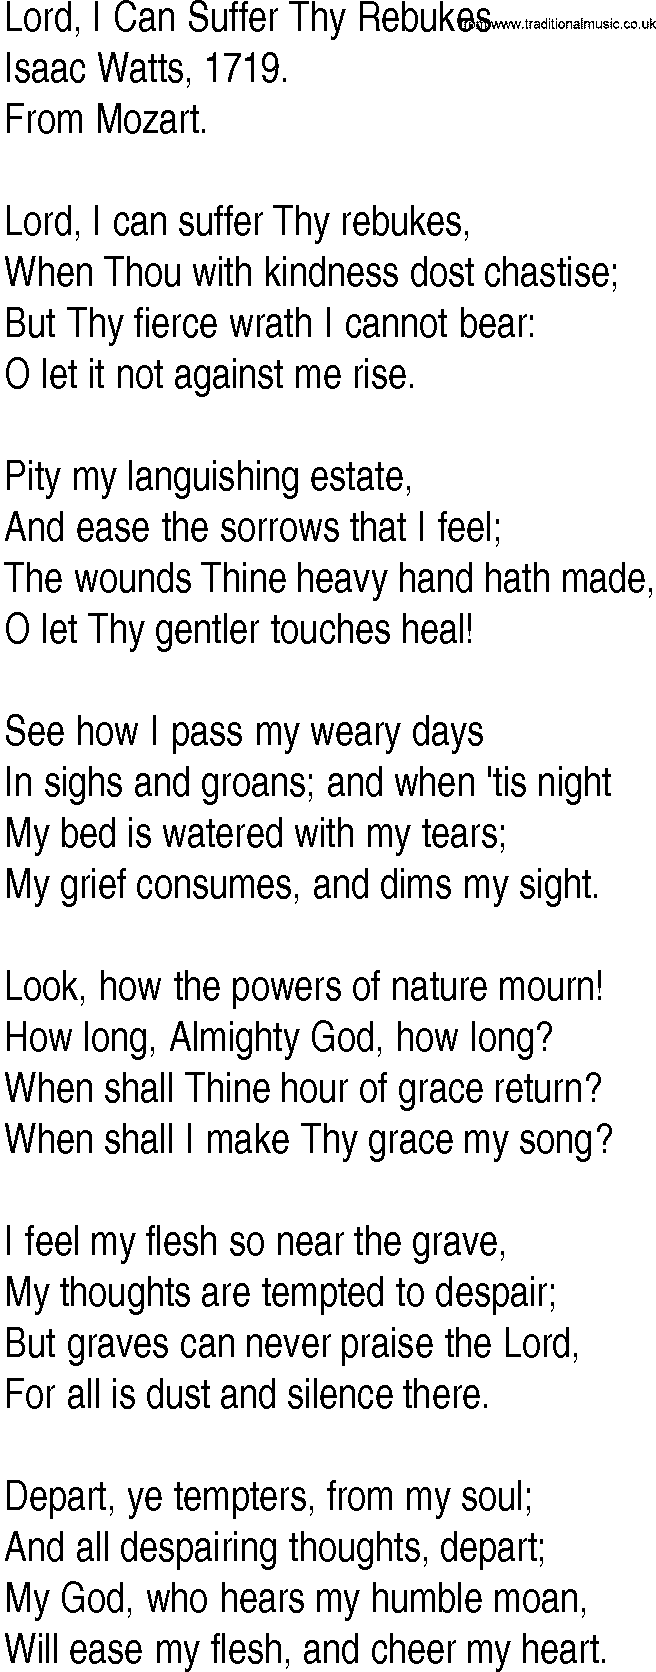 Hymn and Gospel Song: Lord, I Can Suffer Thy Rebukes by Isaac Watts lyrics